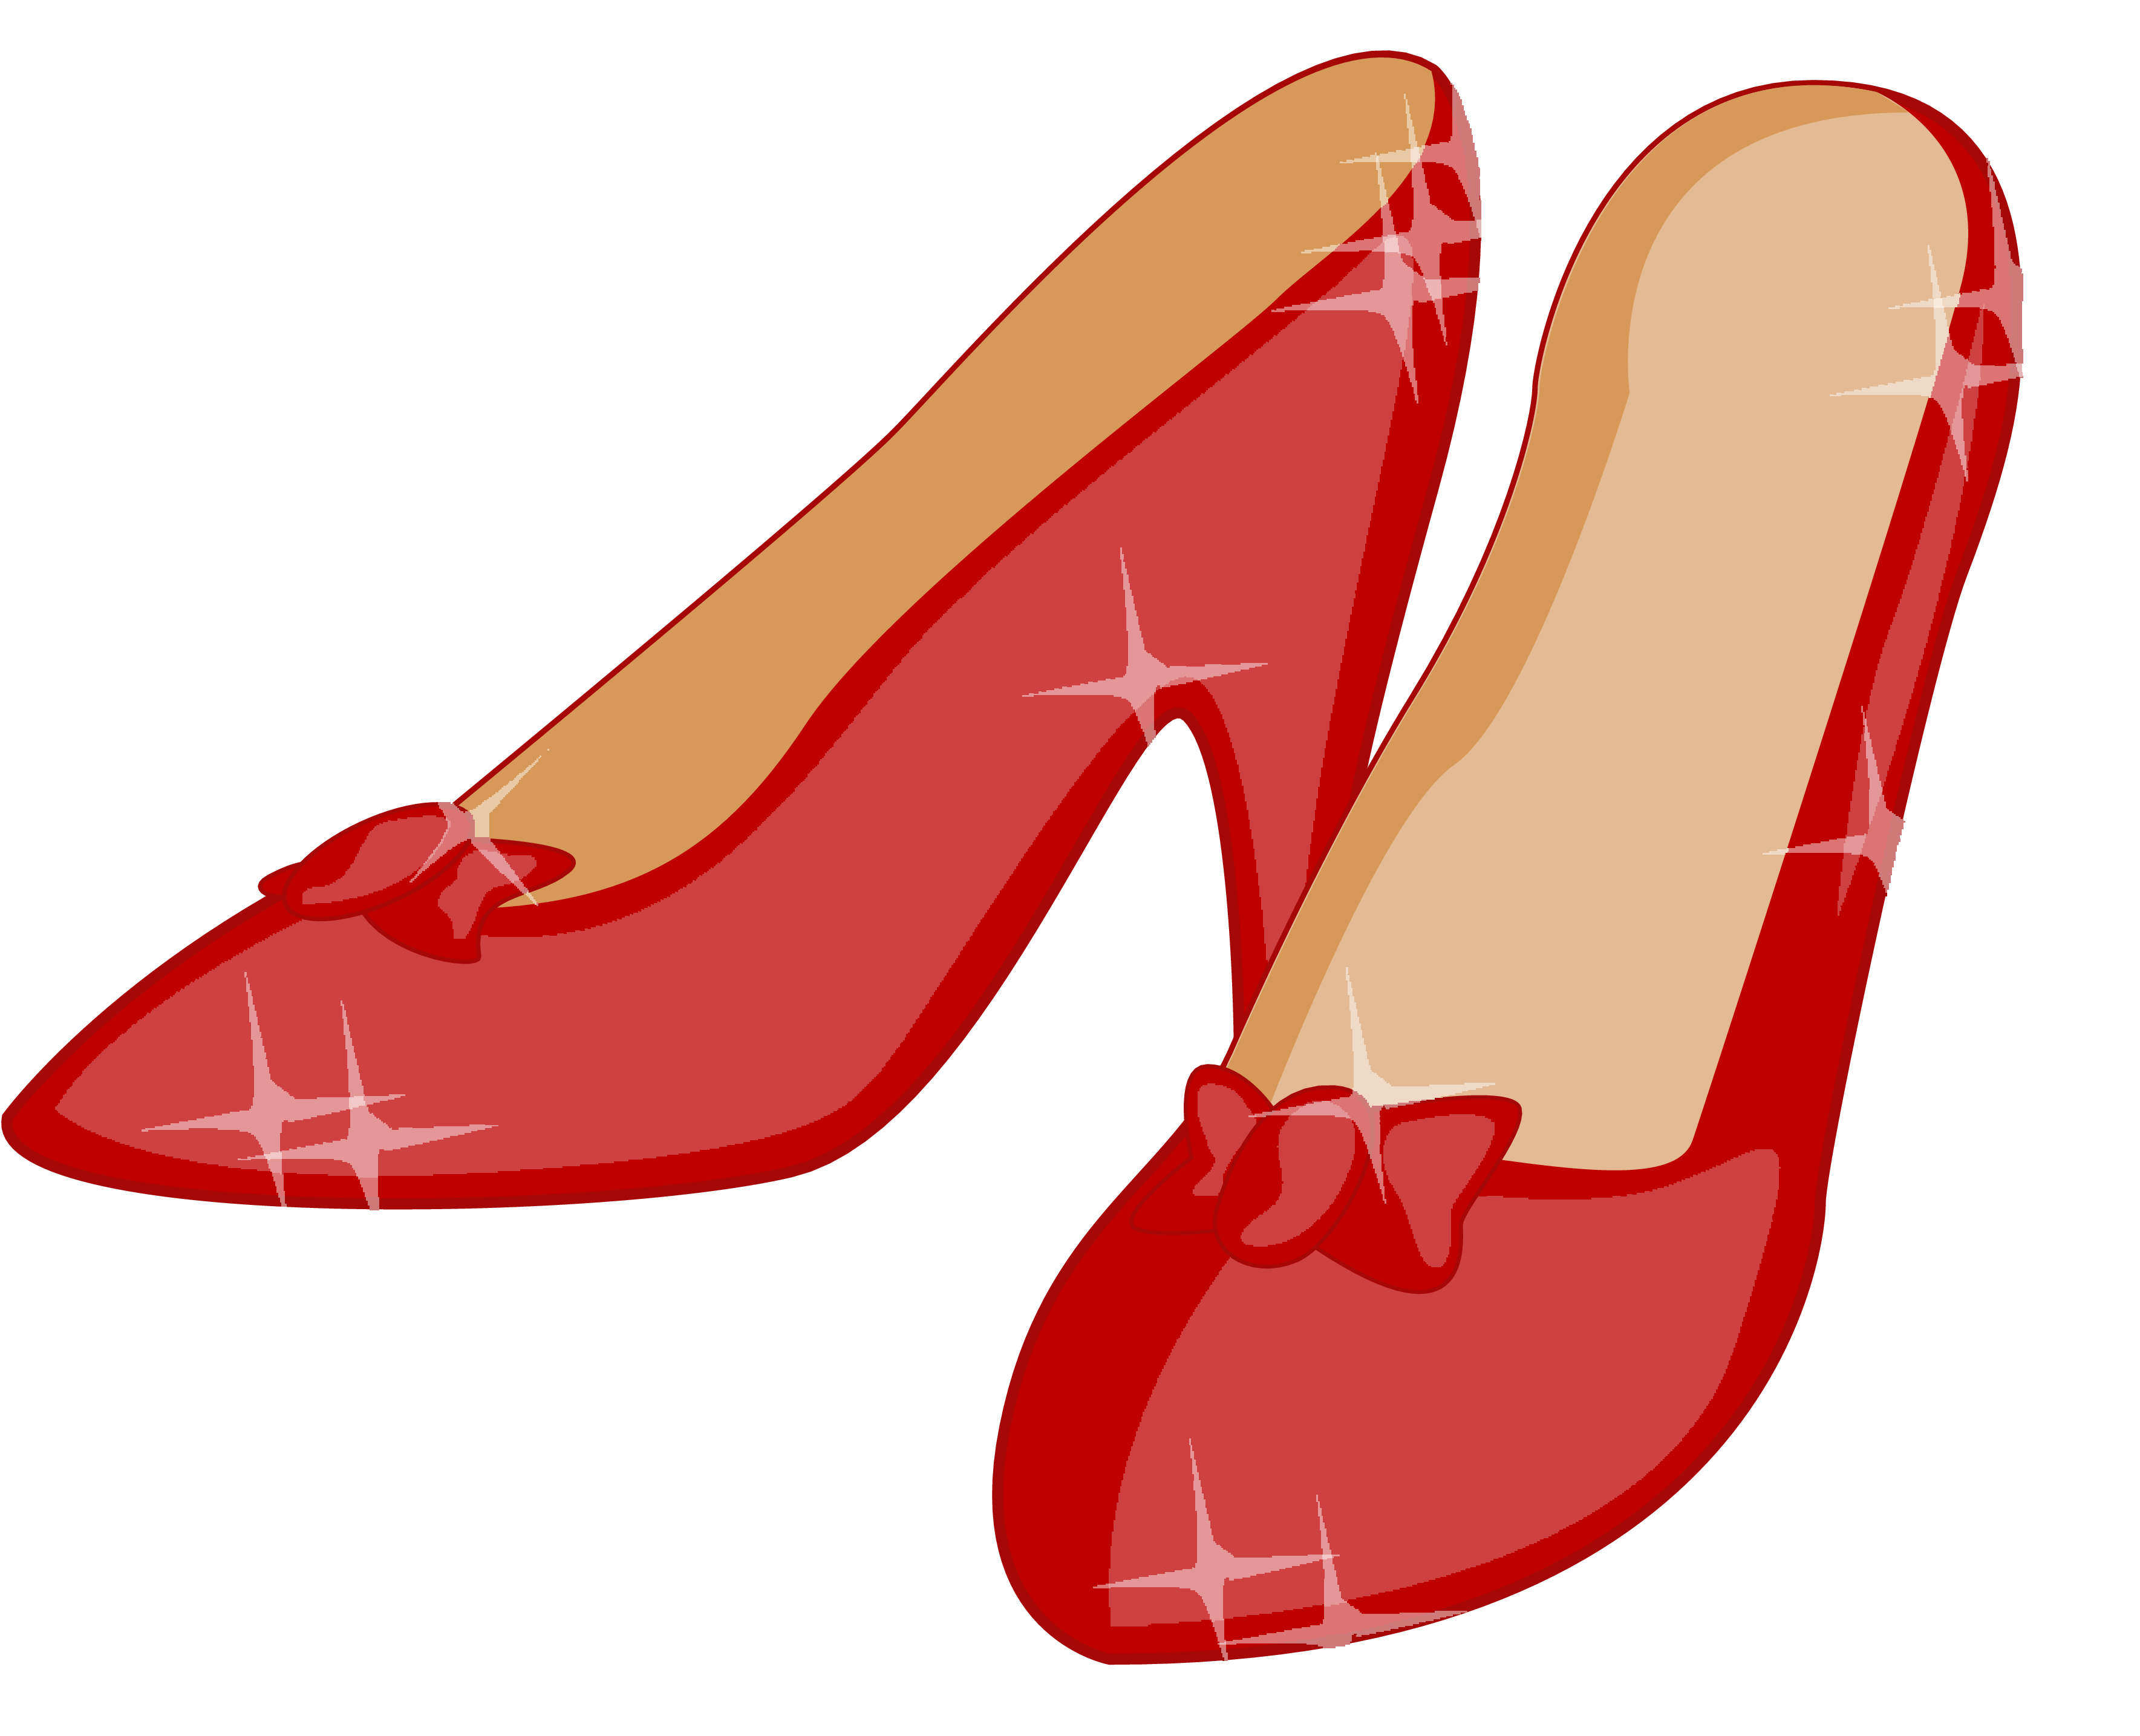 Ruby slipper graphic house. Jacket clipart shoe